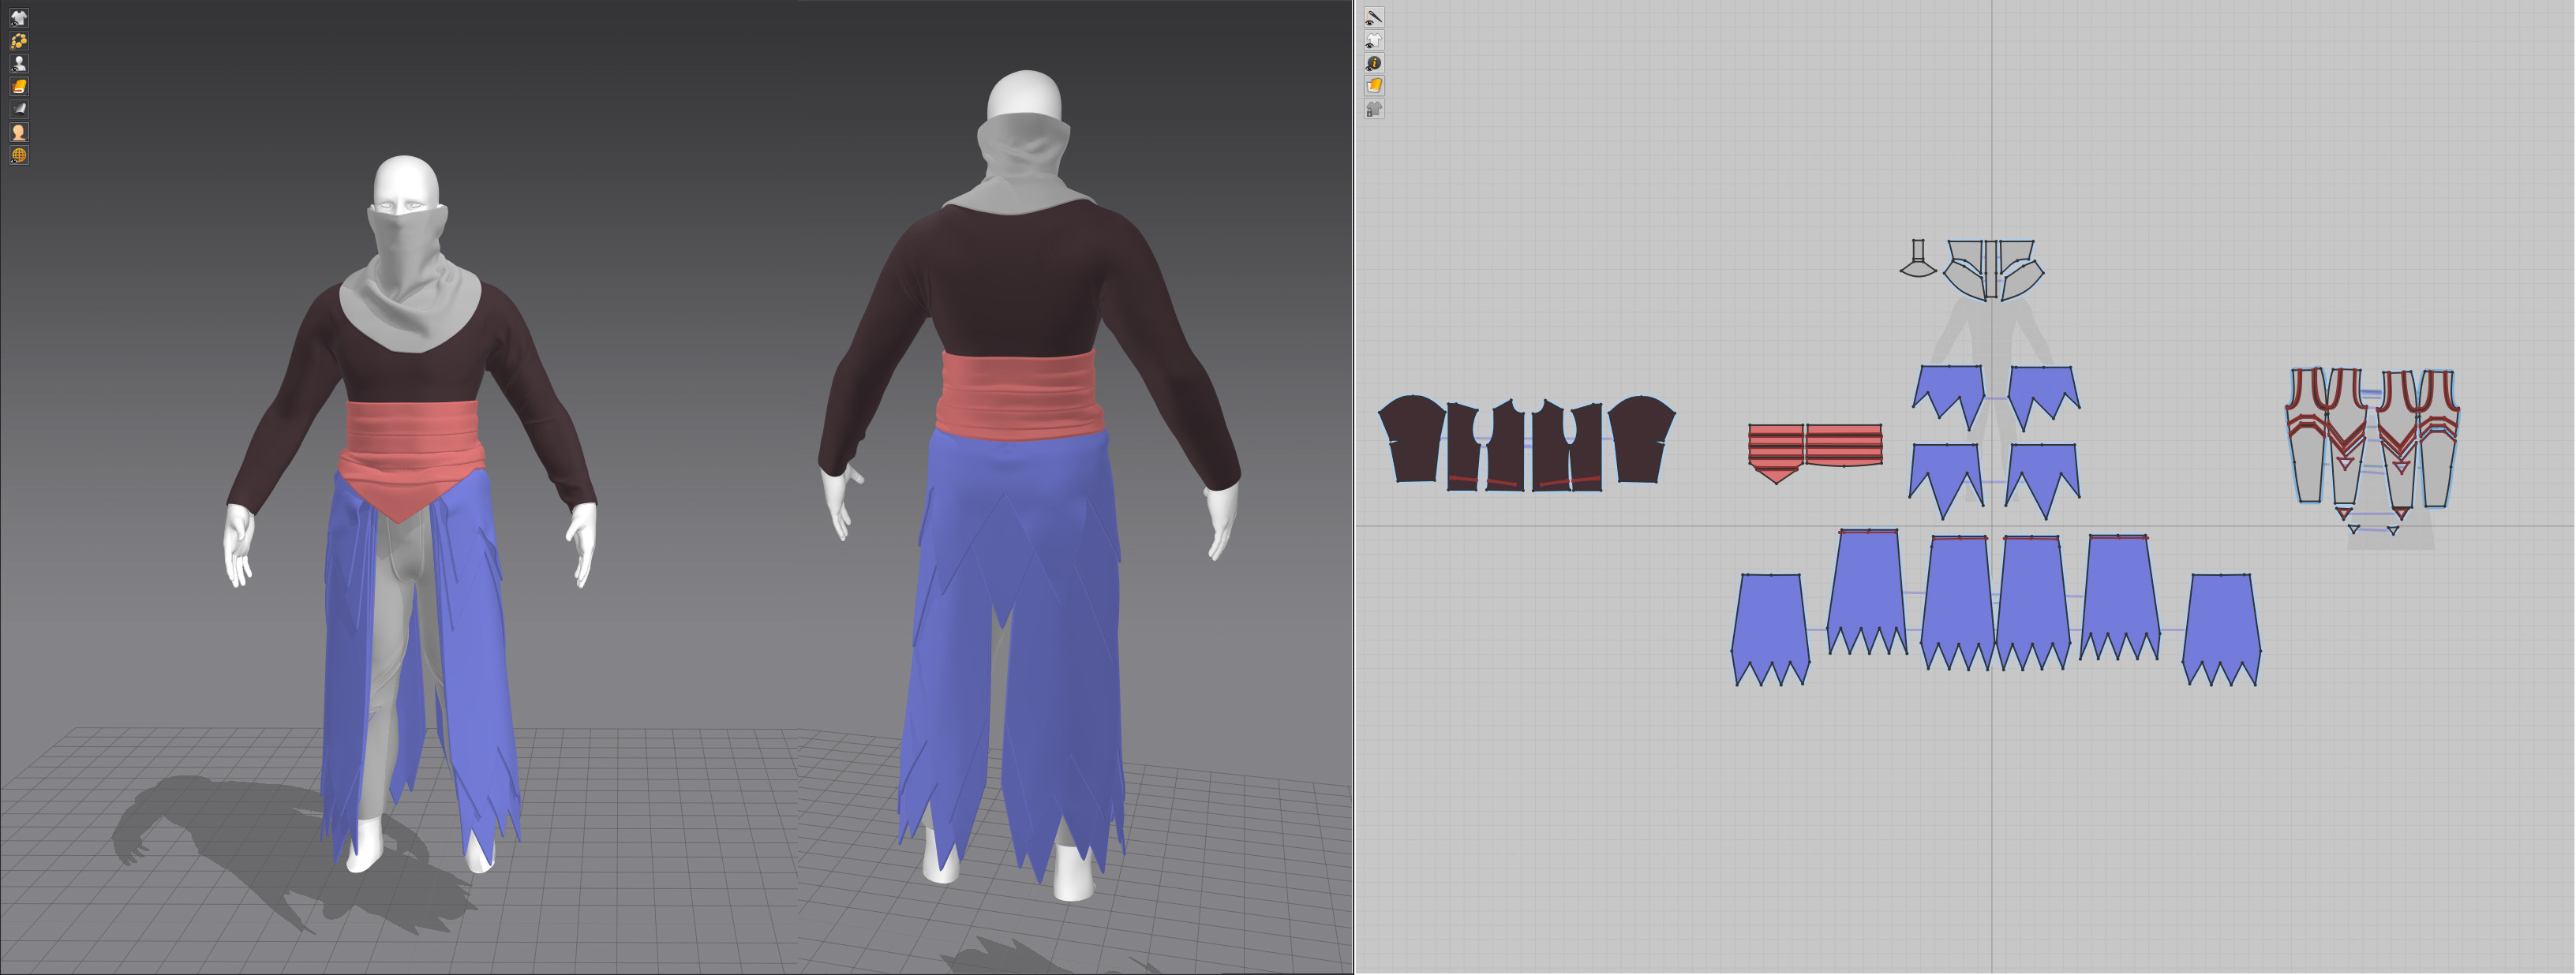 In Marvelous Designer it can be a good idea to import objects to help hold certain shapes while simulating the cloth. For this project I used a cone shape to keep the bottom of the skirt from being pulled straight down.